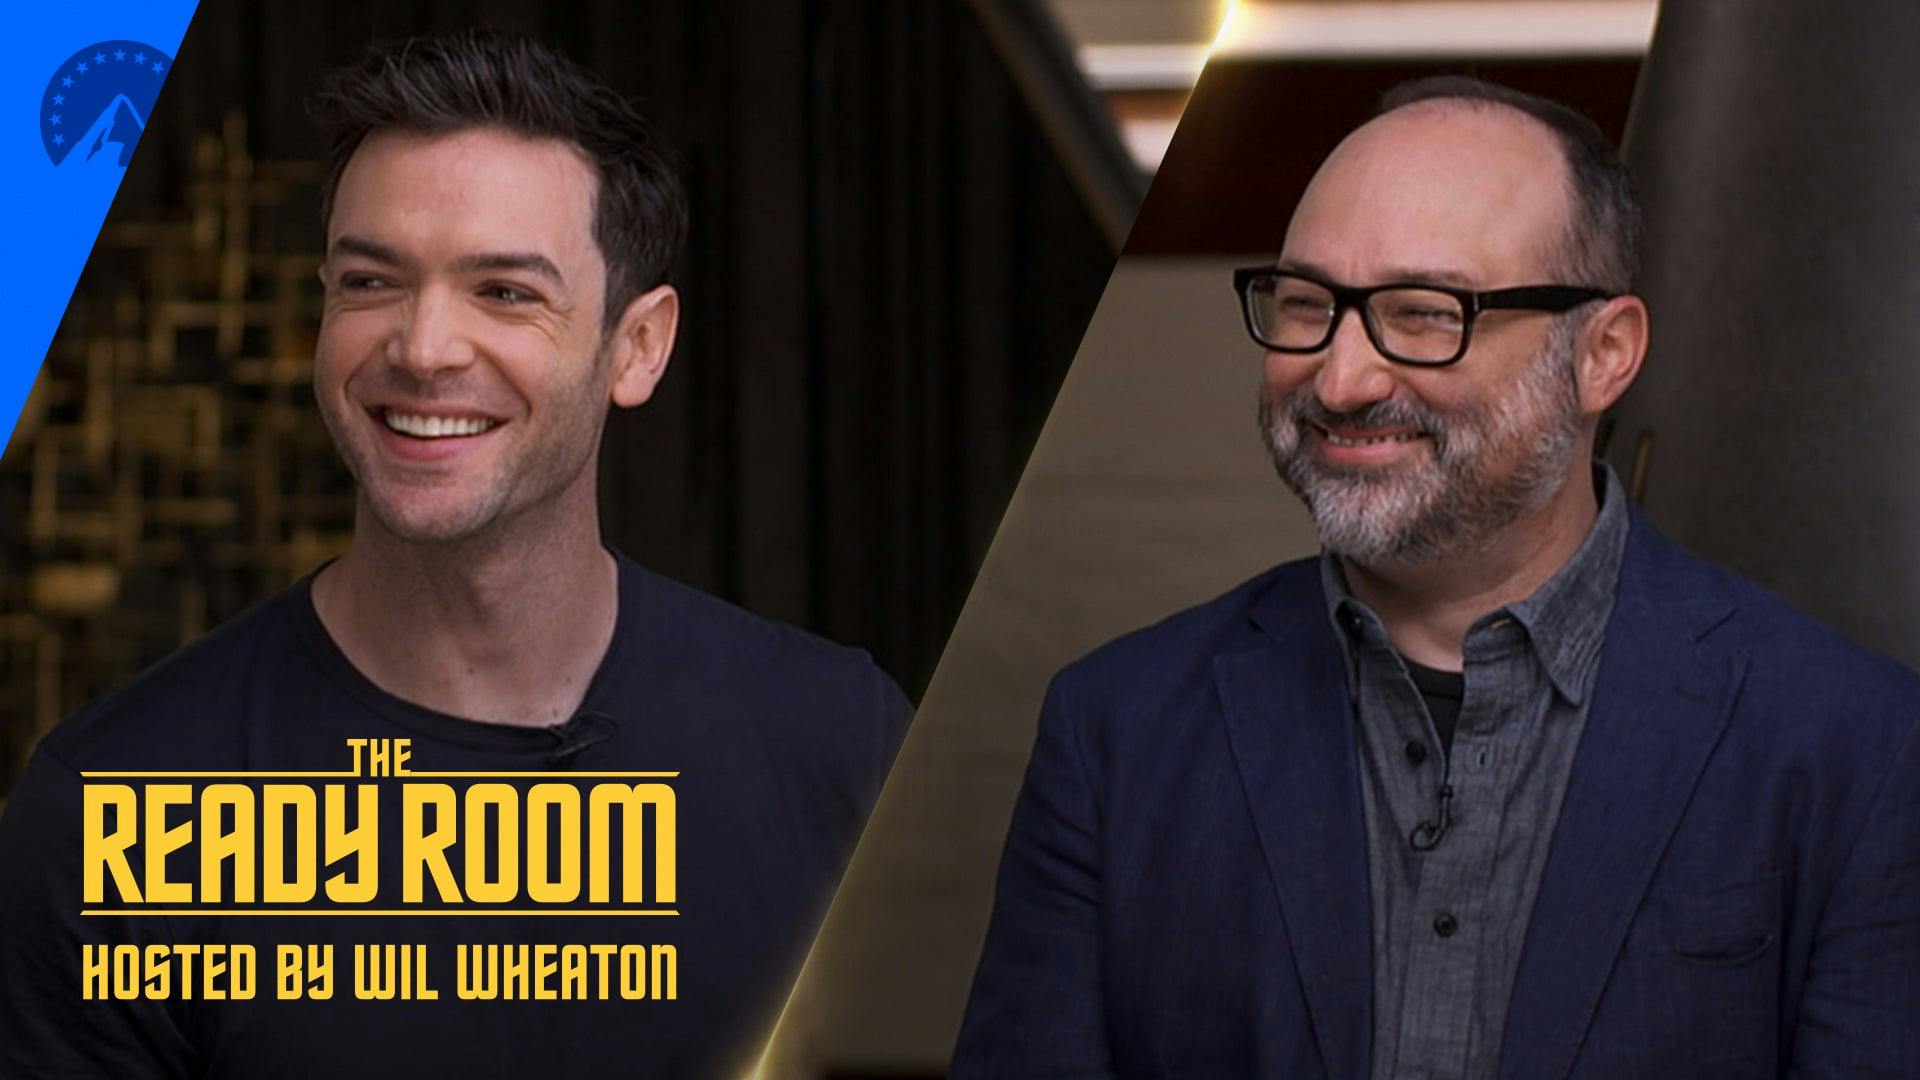 Ethan Peck and Henry Alonso Myers smile as they are interviewed by Wil Wheaton for The Ready Room.